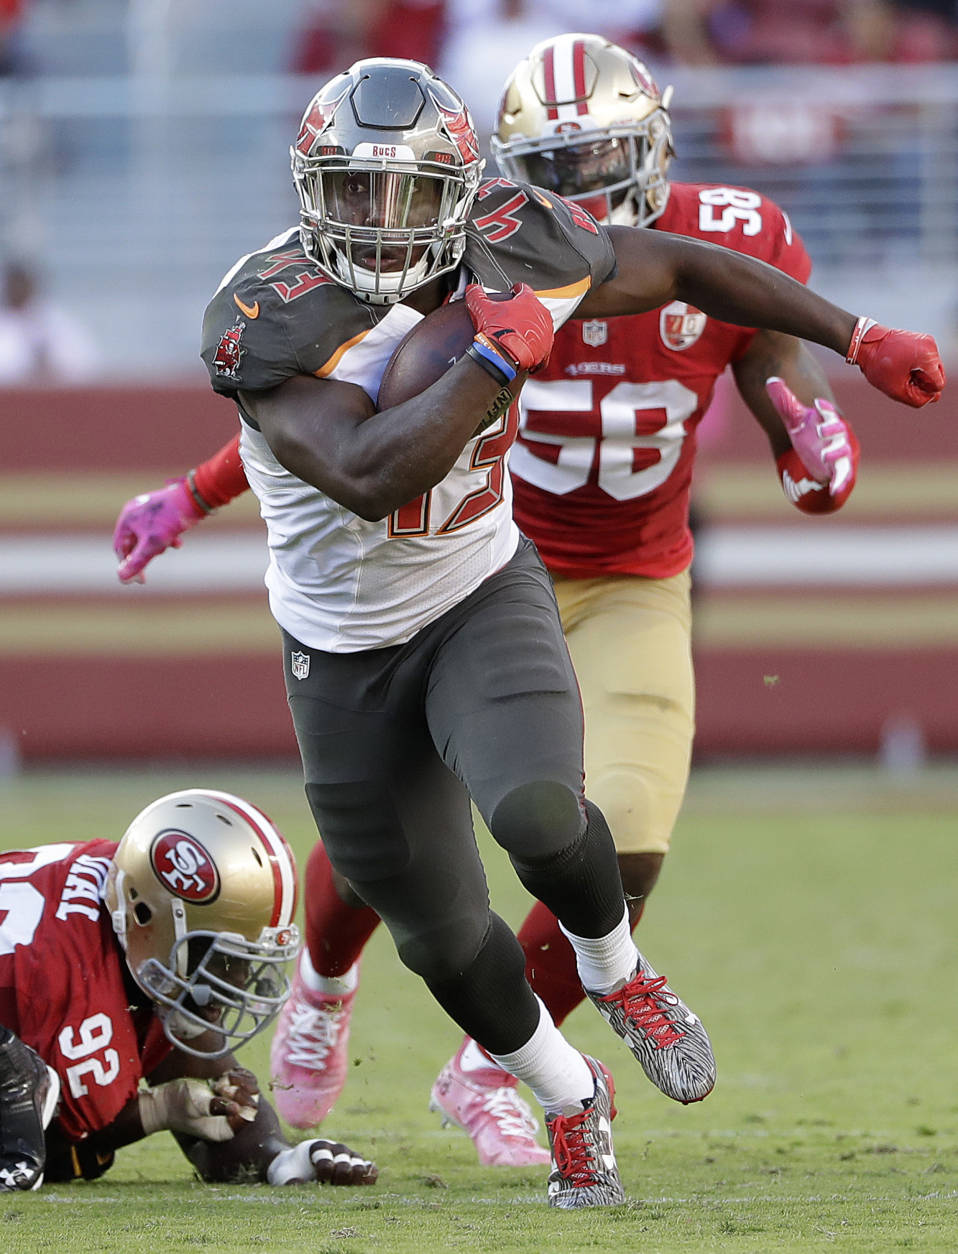 Tampa Bay Buccaneers running back Peyton Barber (43) runs for a touchdown against the San Francisco 49ers during the second half of an NFL football game in Santa Clara, Calif., Sunday, Oct. 23, 2016. (AP Photo/Marcio Jose Sanchez)